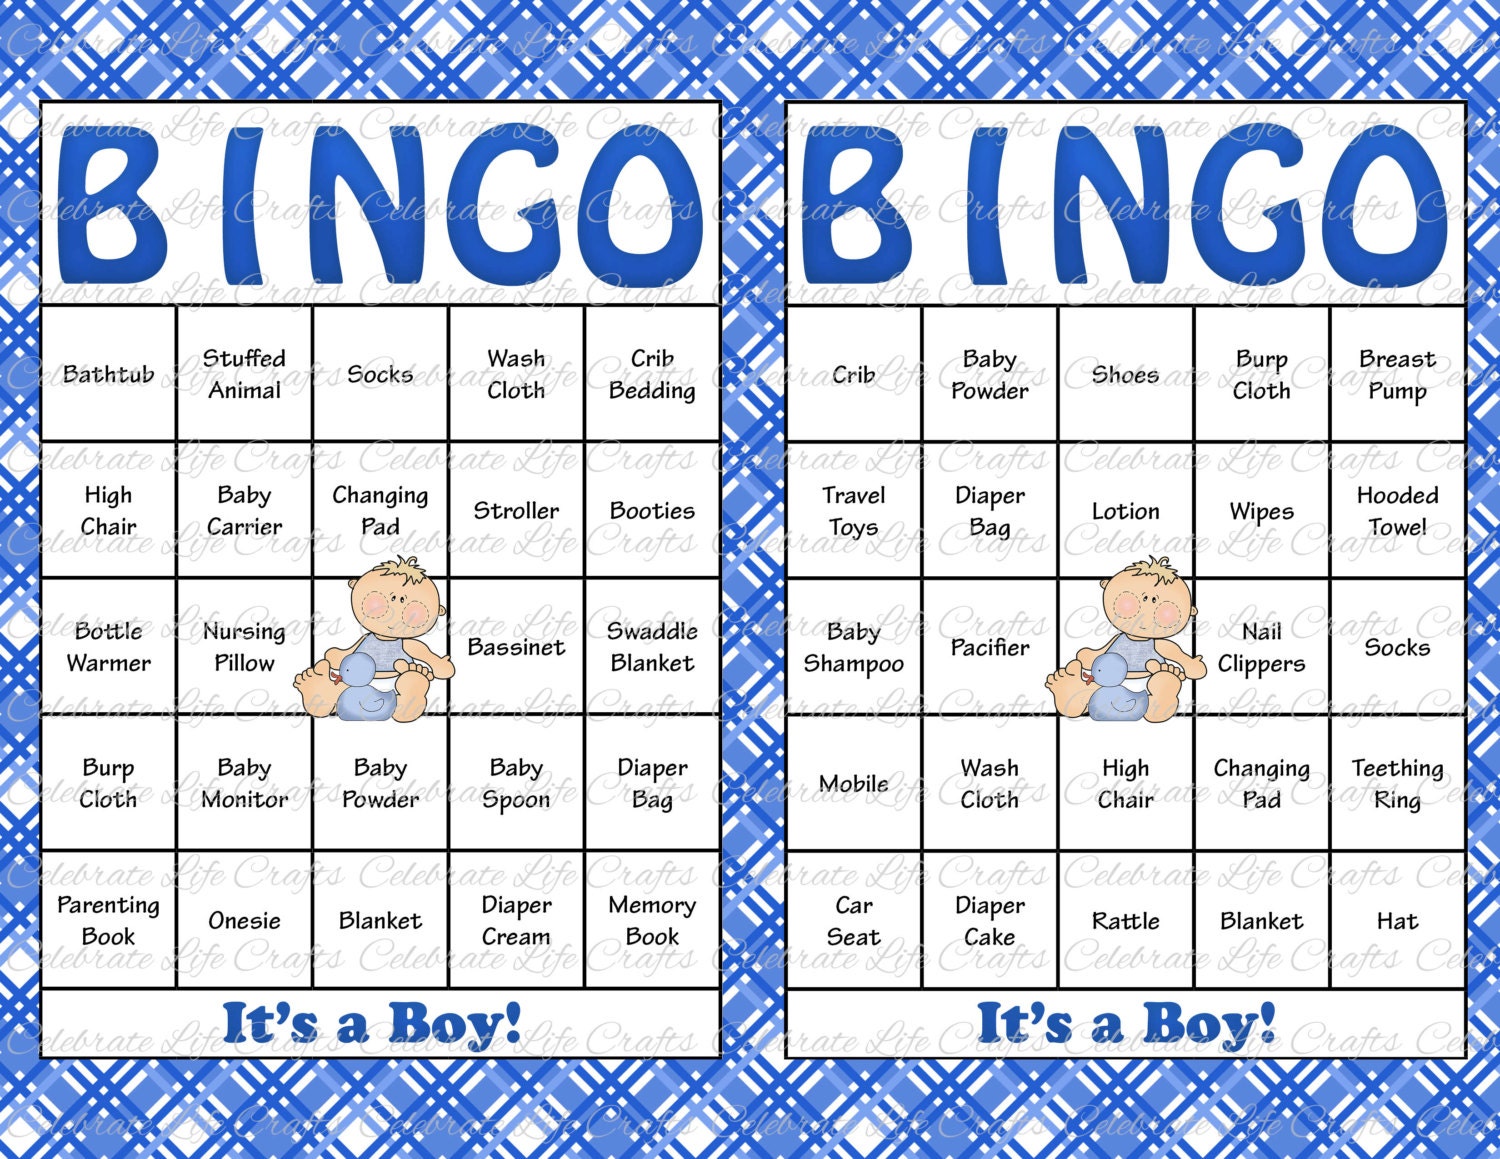 60-baby-shower-bingo-cards-printable-party-by-celebratelifecrafts